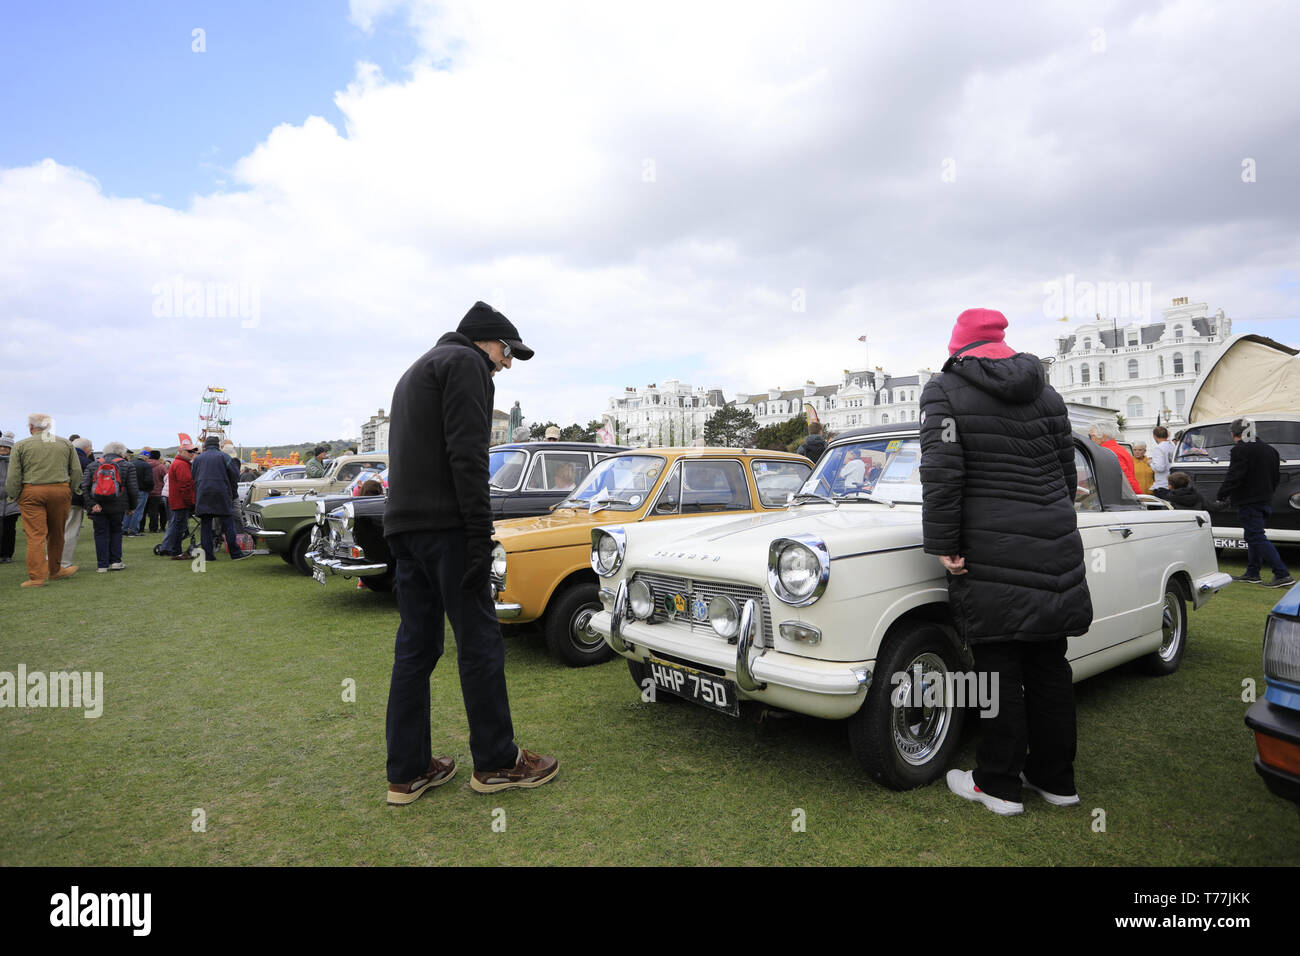 Eastbourne, UK. 5th May 2019. Uk weather.Car enthusiasts flock to a cloudy Eastbourne today. With more than 900 vehicles expected to take part, the Magnificent motors event runs for 2 days over the Bank holiday weekend & is one of the biggest events of its kind on the South coast. Credit:Ed Brown/Alamy Live News. Stock Photo